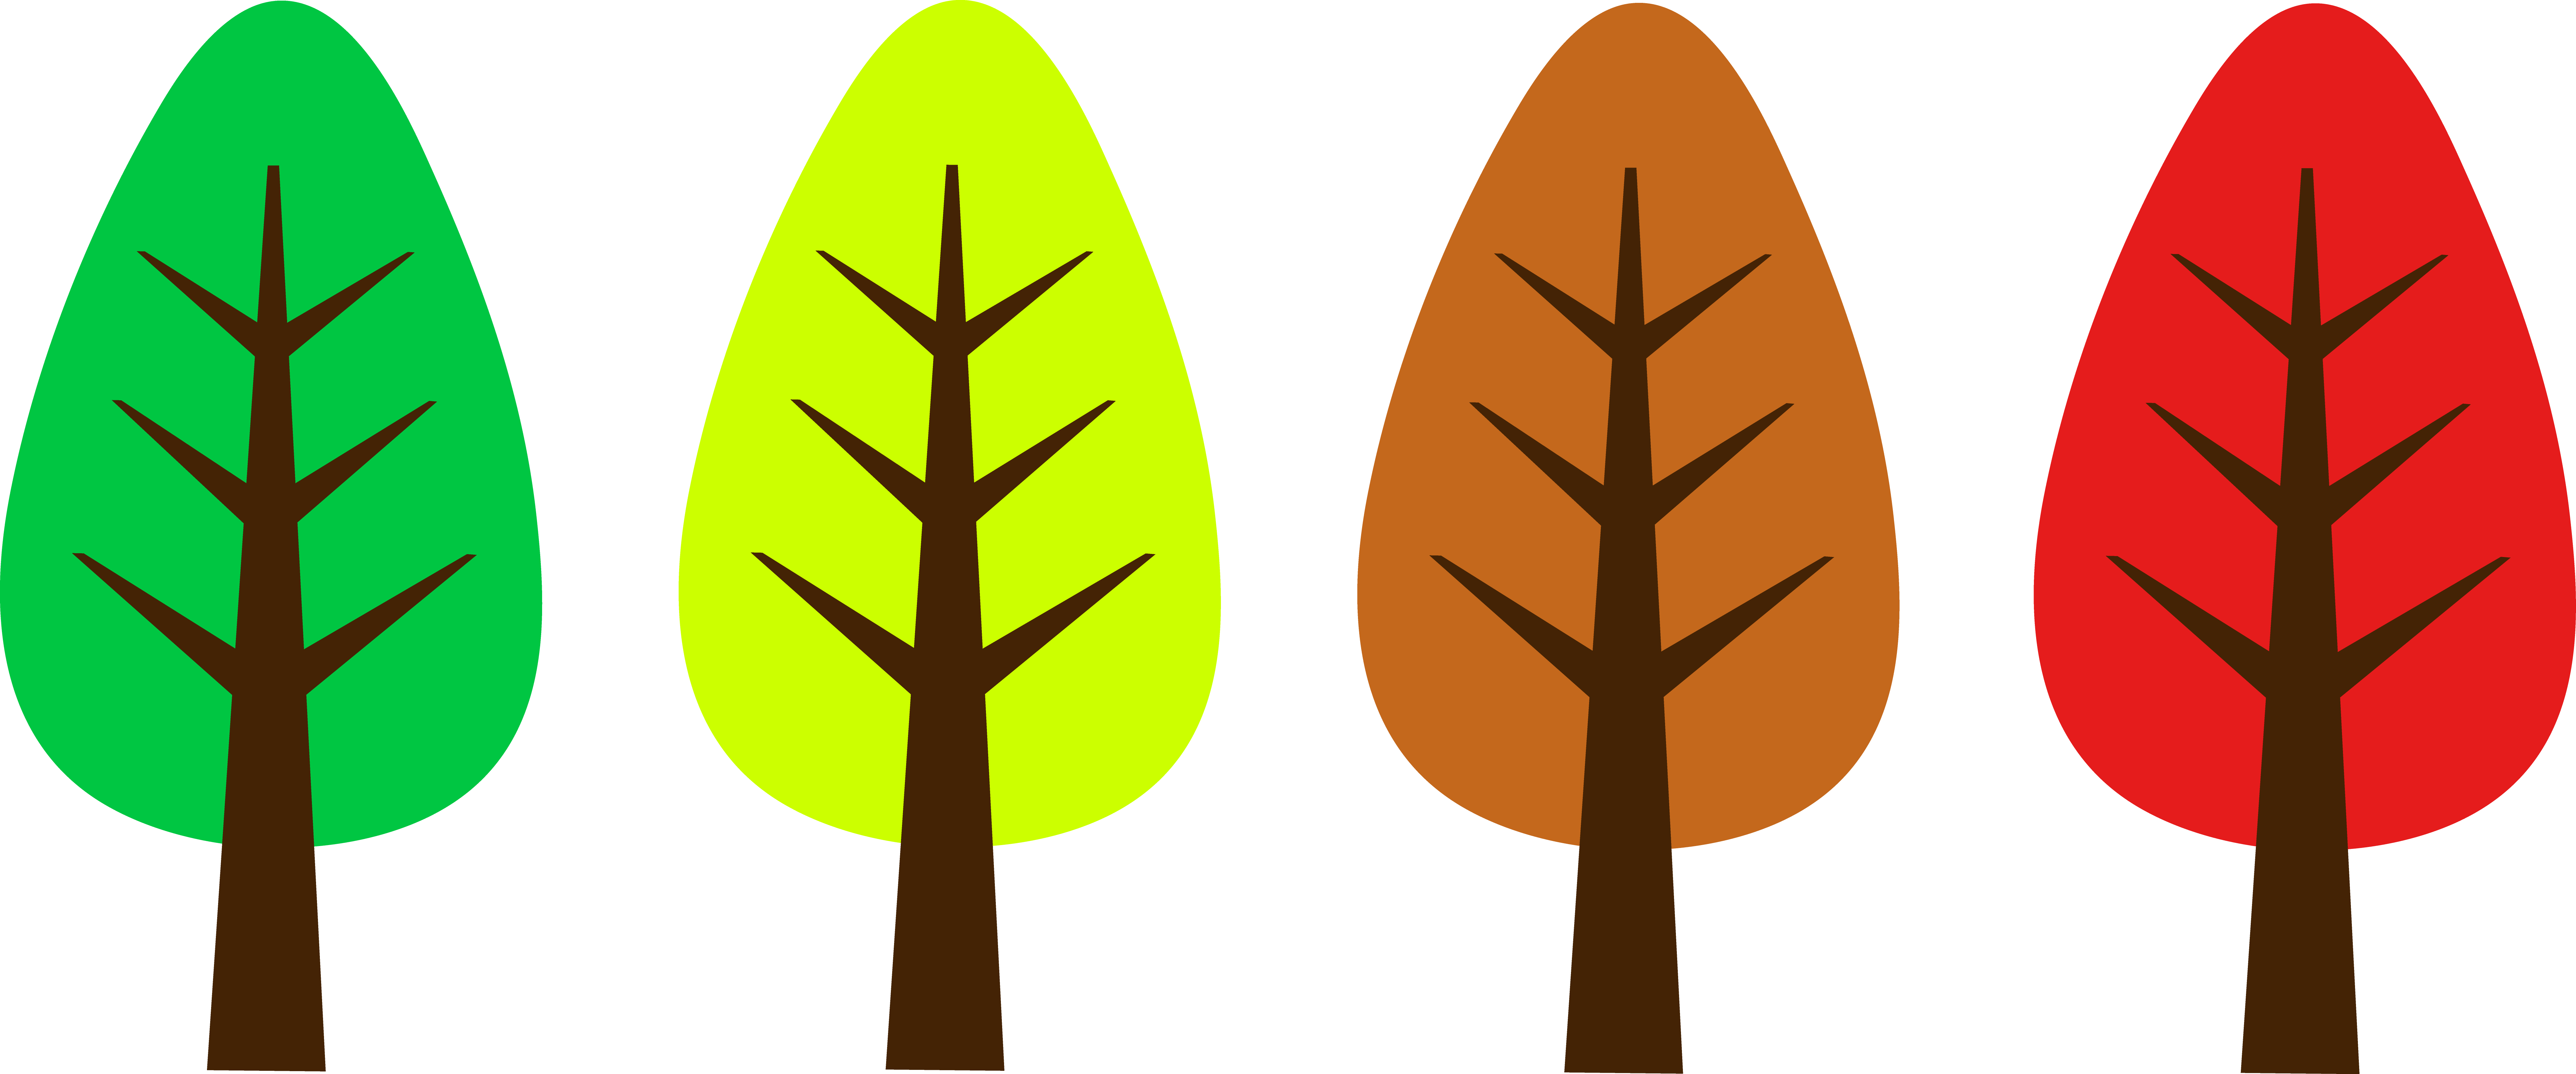 Simple Tree Clipart | Free download on ClipArtMag